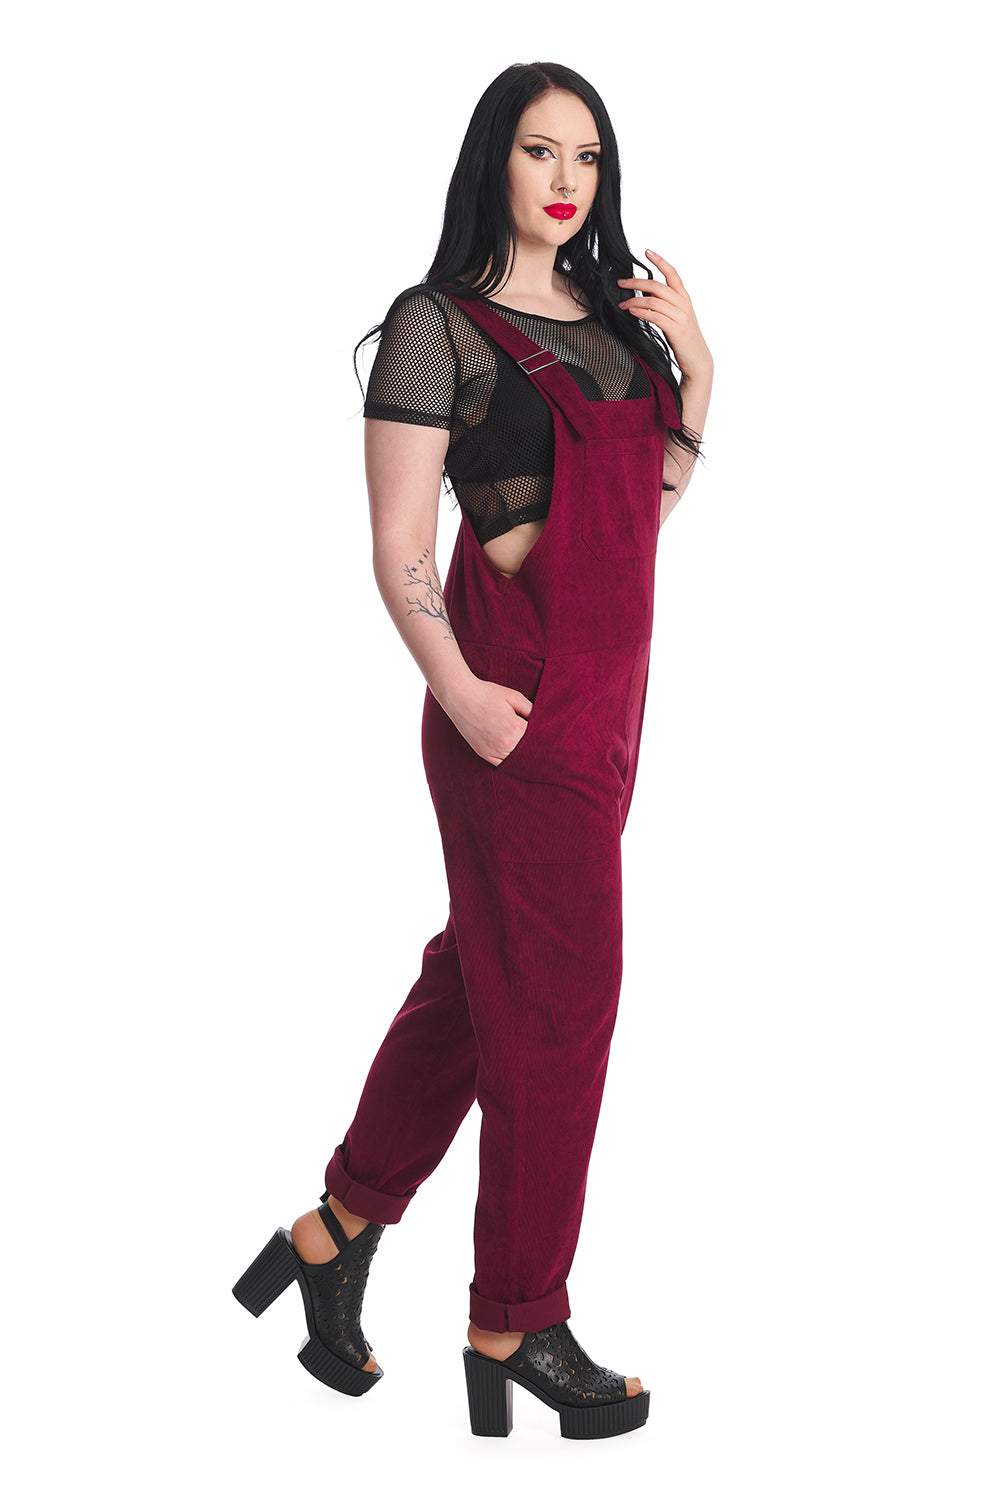 Gothic model in burgundy dungarees with a black mesh top 